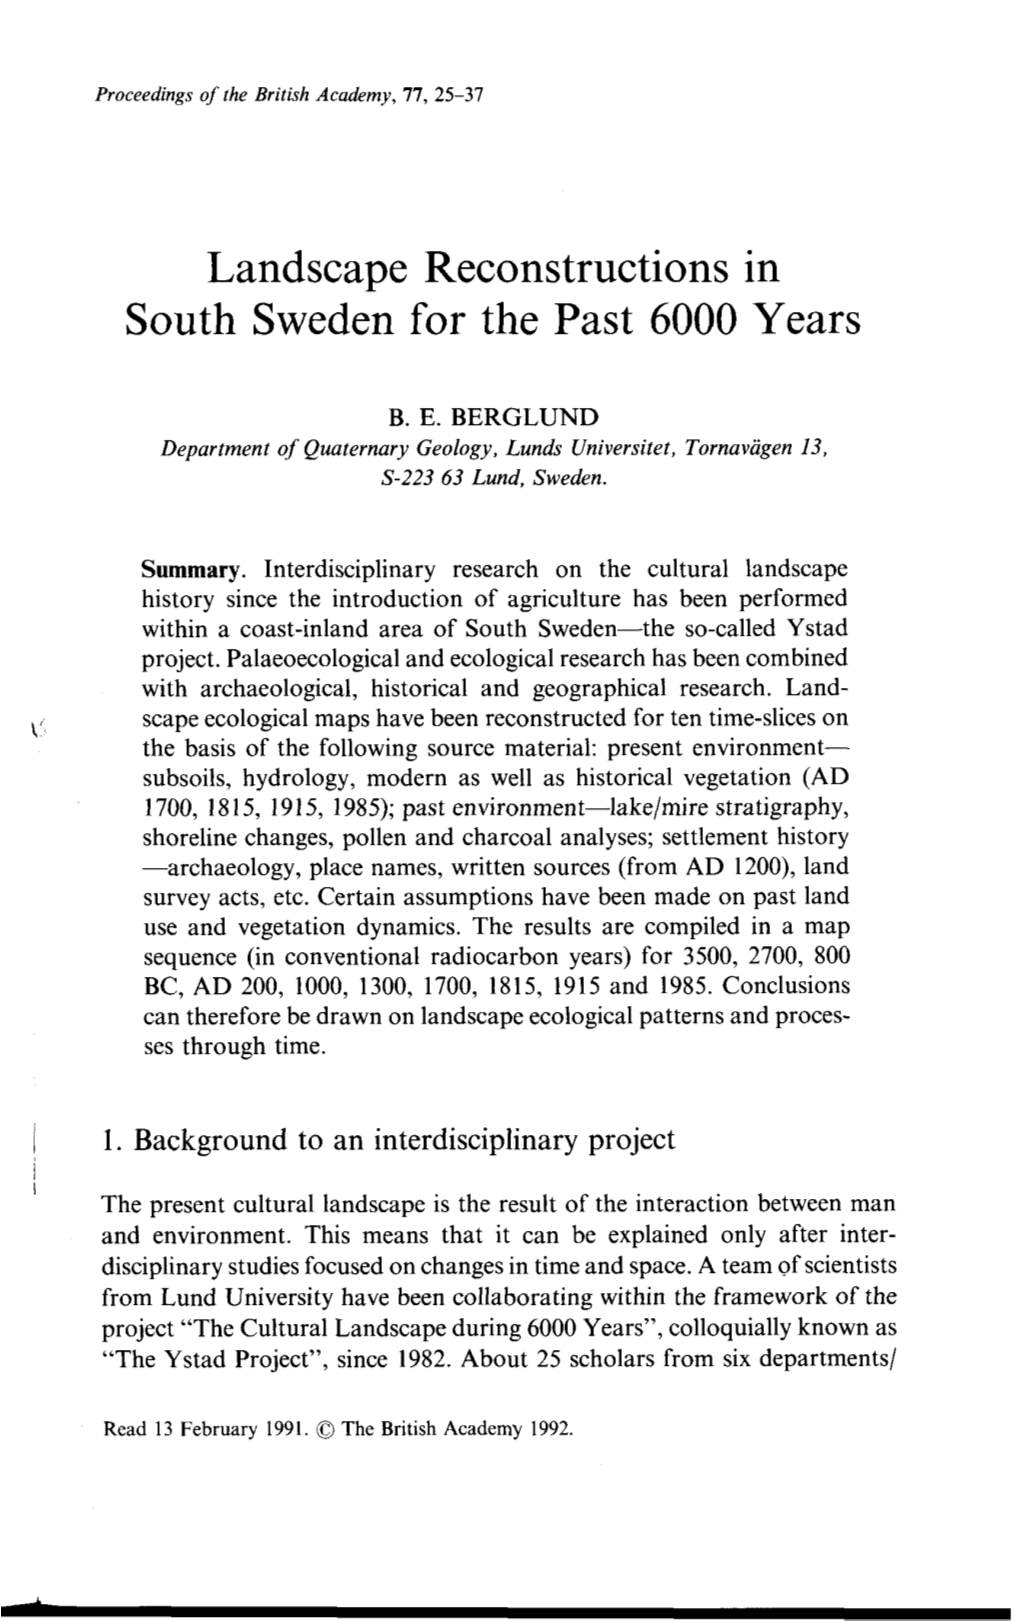 Landscape Reconstructions in South Sweden for the Past 6000 Years